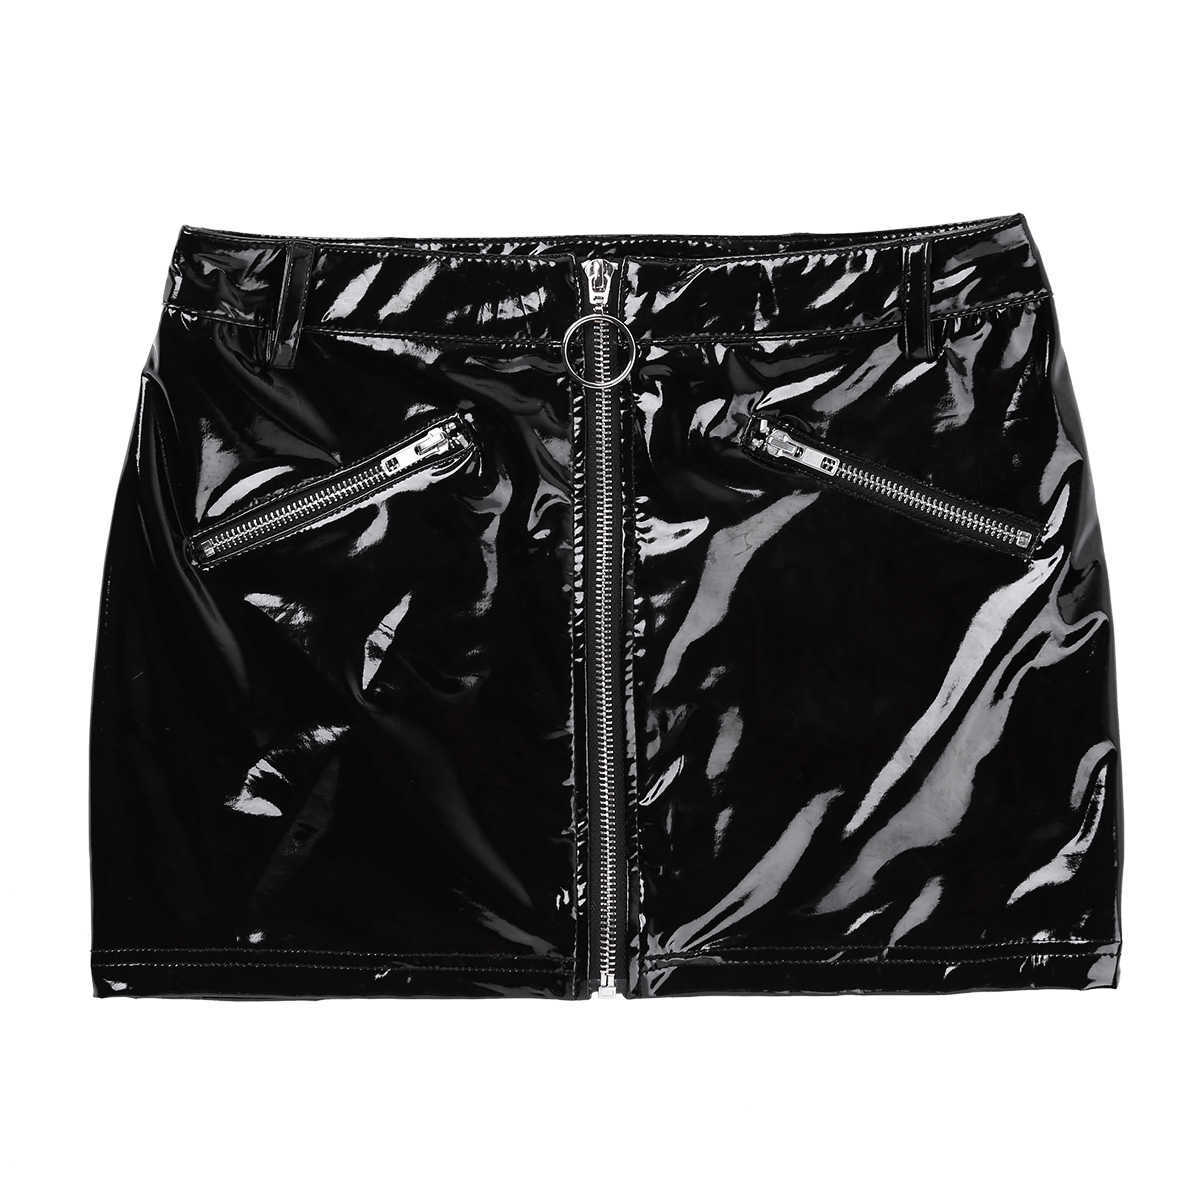 Skirts Women Shiny Stretchy Black Faux Leather Skirt Y2k Clothes Street Style Bottoms 2000s Aesthetic Bodycon Mini Skirts Sexy Clubwear P230422